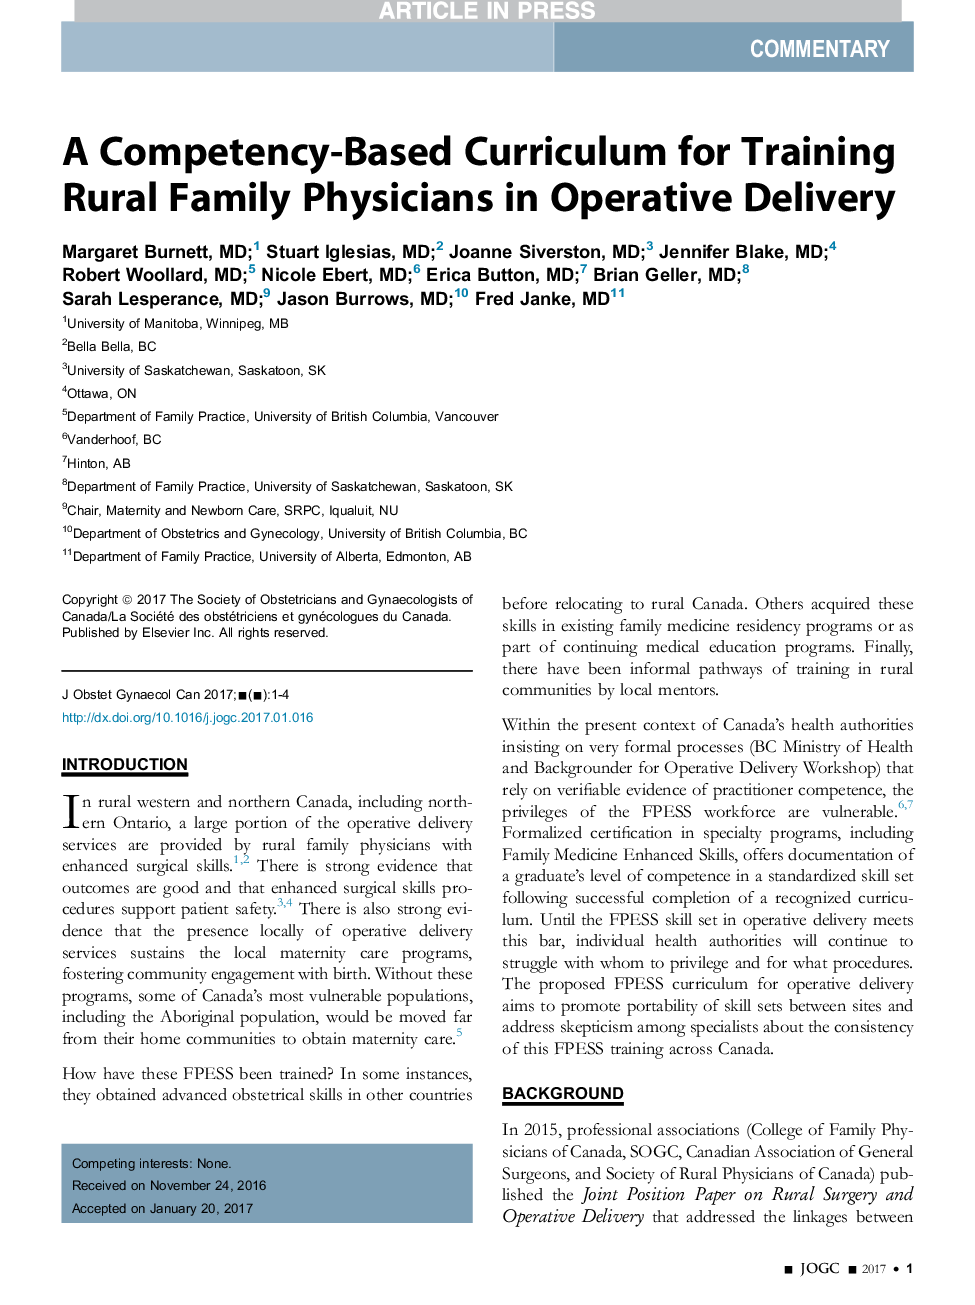 A Competency-Based Curriculum for Training Rural Family Physicians in Operative Delivery